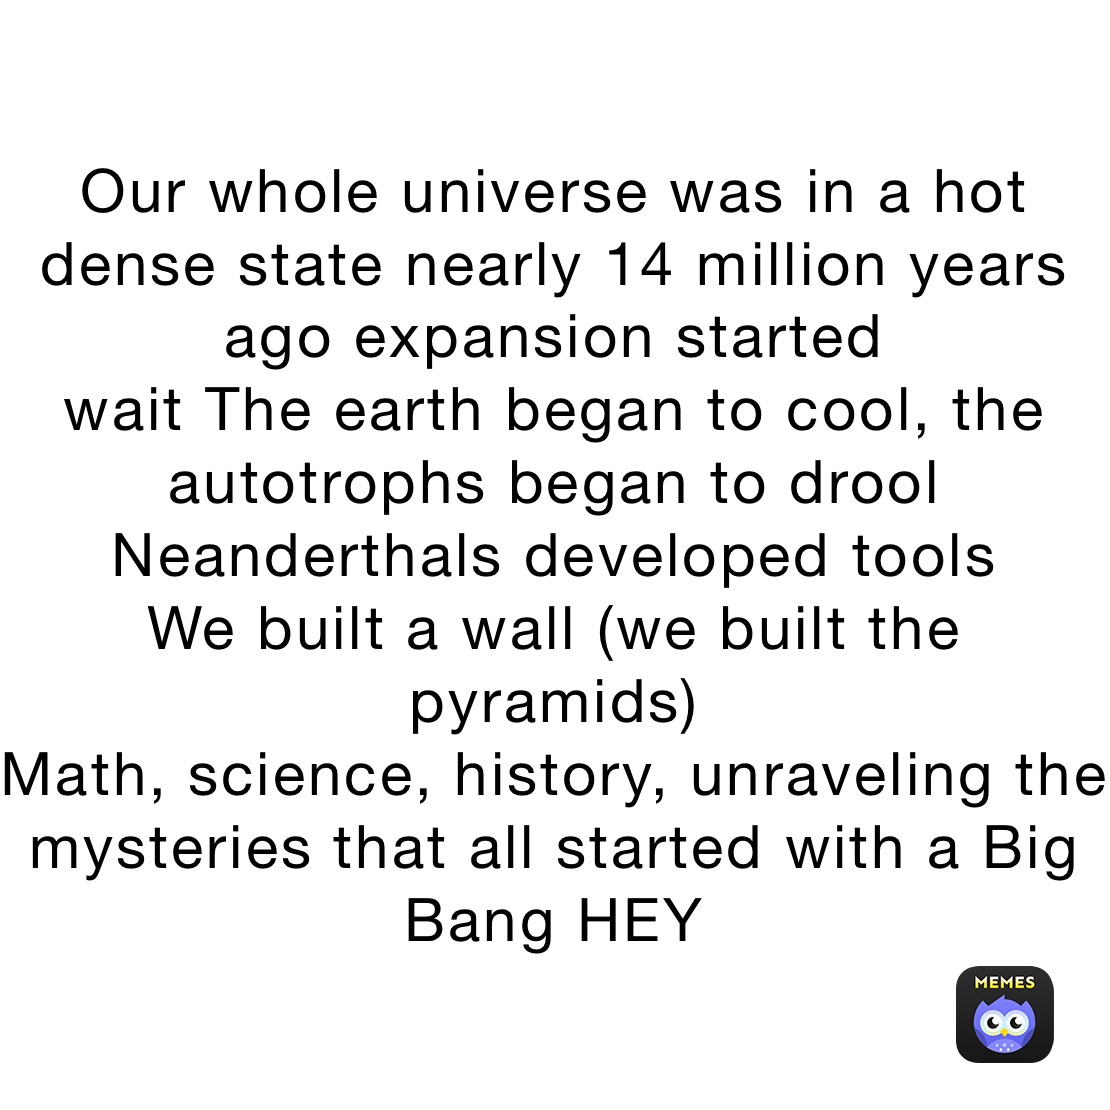 Our whole universe was in a hot dense state nearly 14 million years ago expansion started
wait The earth began to cool, the autotrophs began to drool
Neanderthals developed tools
We built a wall (we built the pyramids)
Math, science, history, unraveling the mysteries that all started with a Big Bang HEY